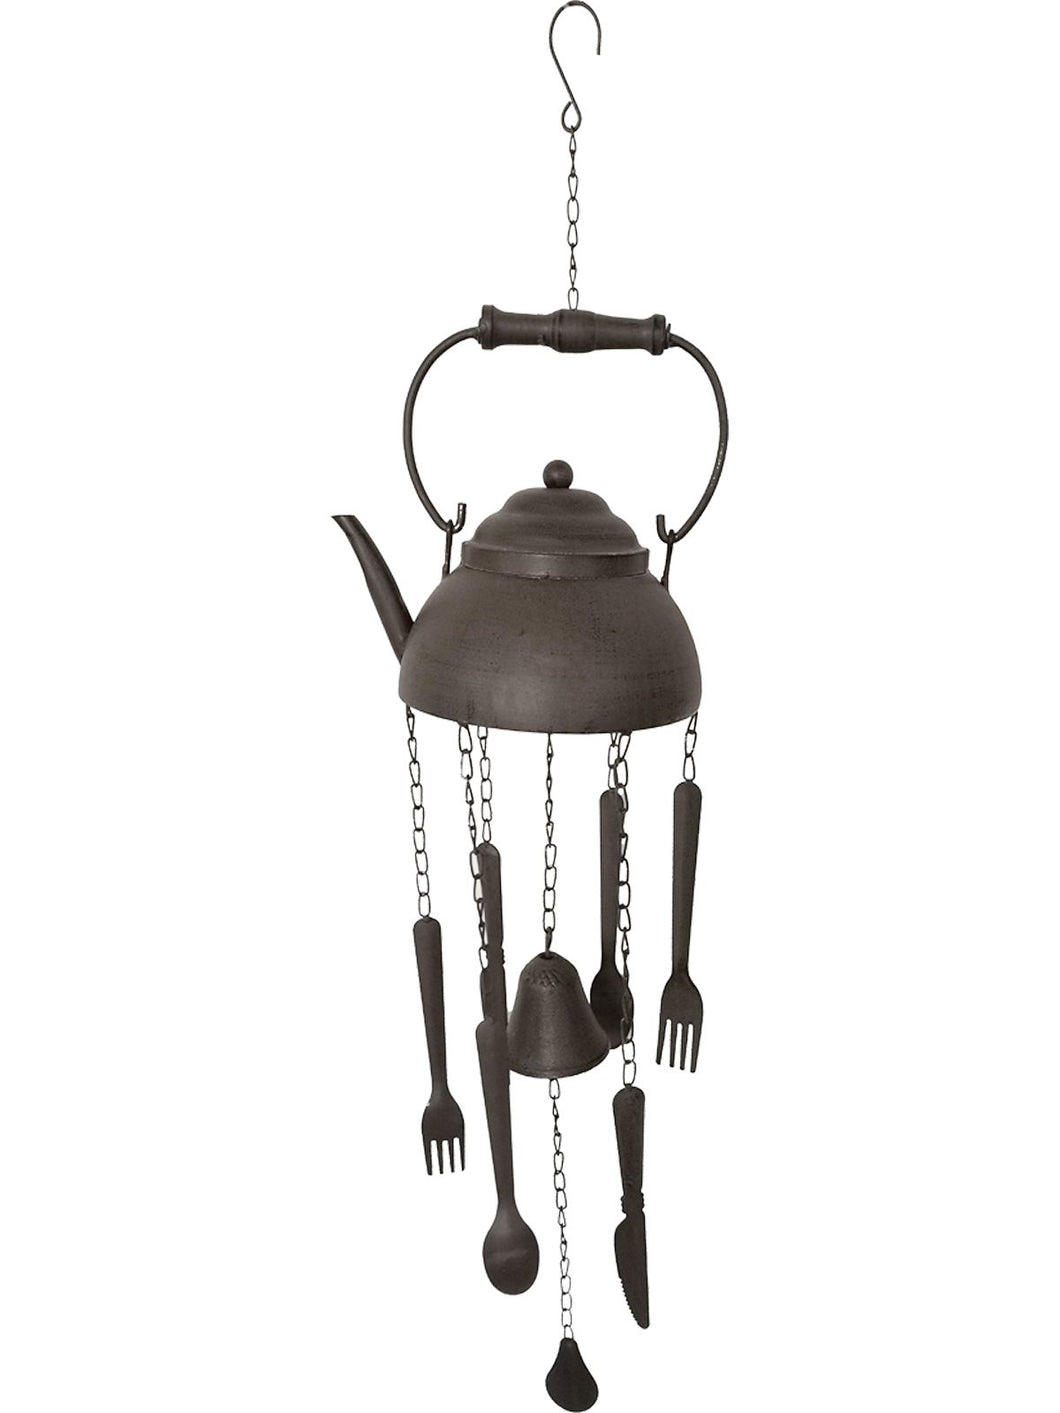 CAST IRON KETTLE WIND CHIME